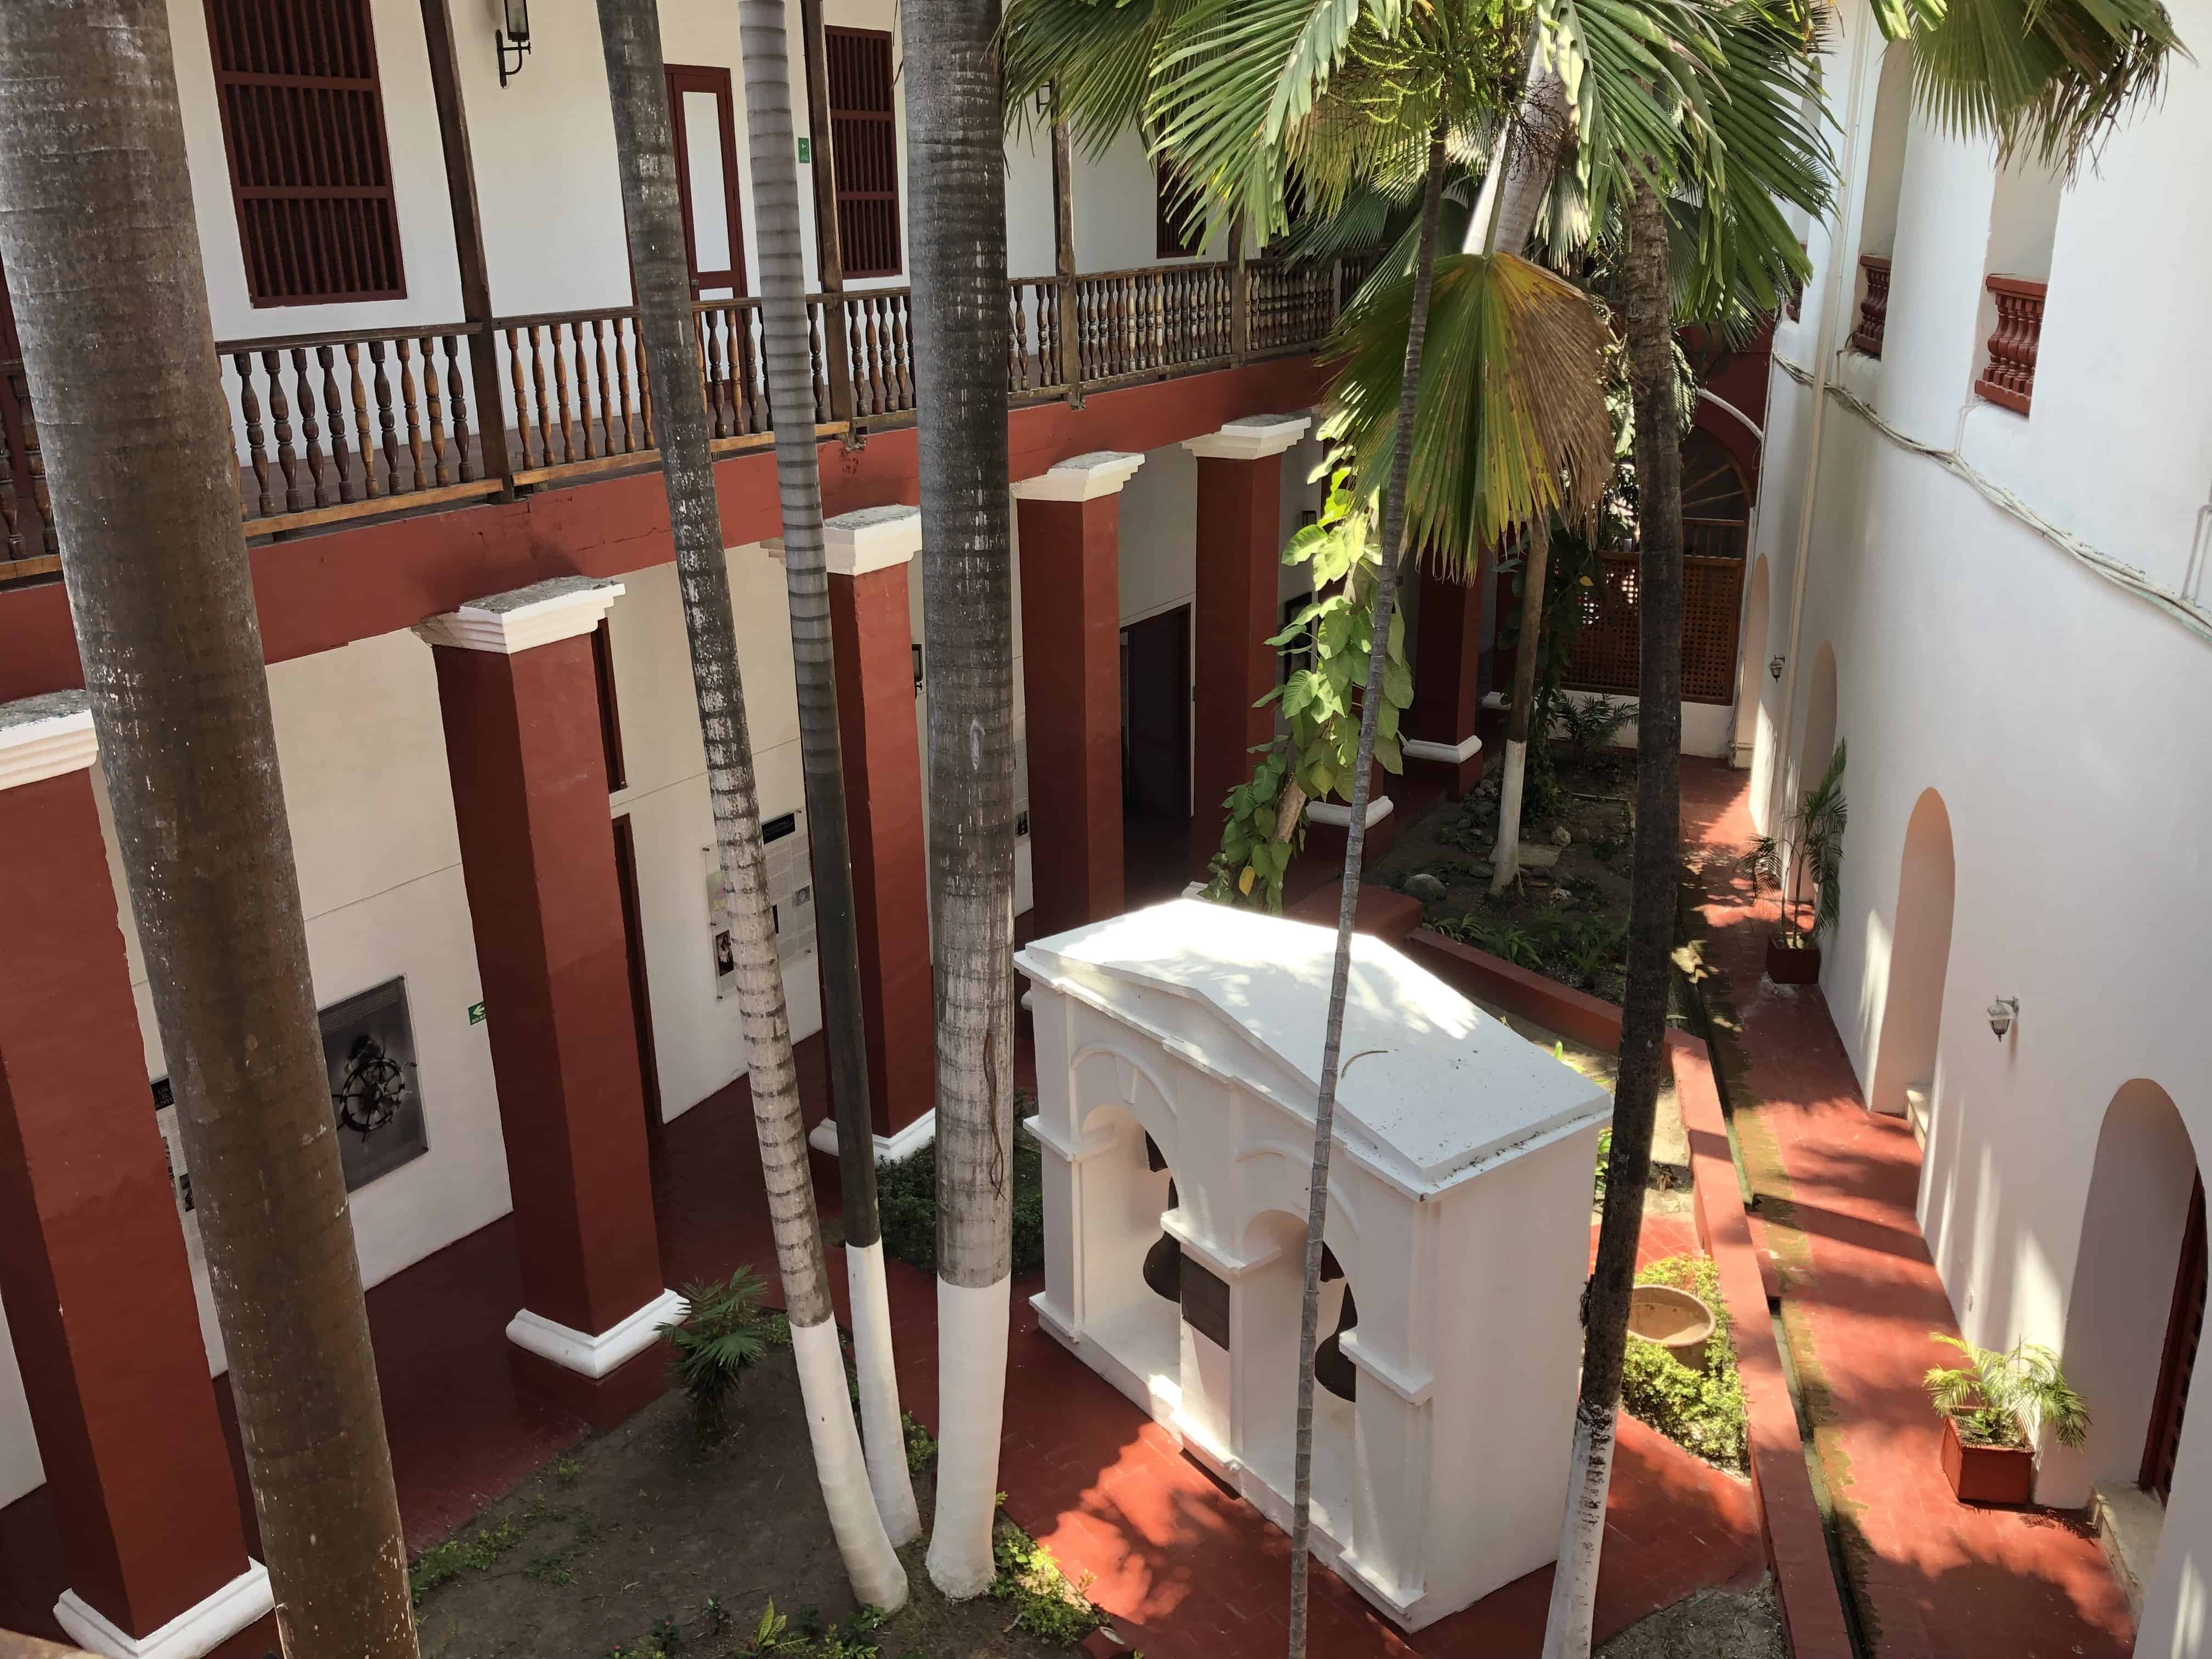 Looking down on the other courtyard at the Caribbean Naval Museum in Cartagena, Colombia